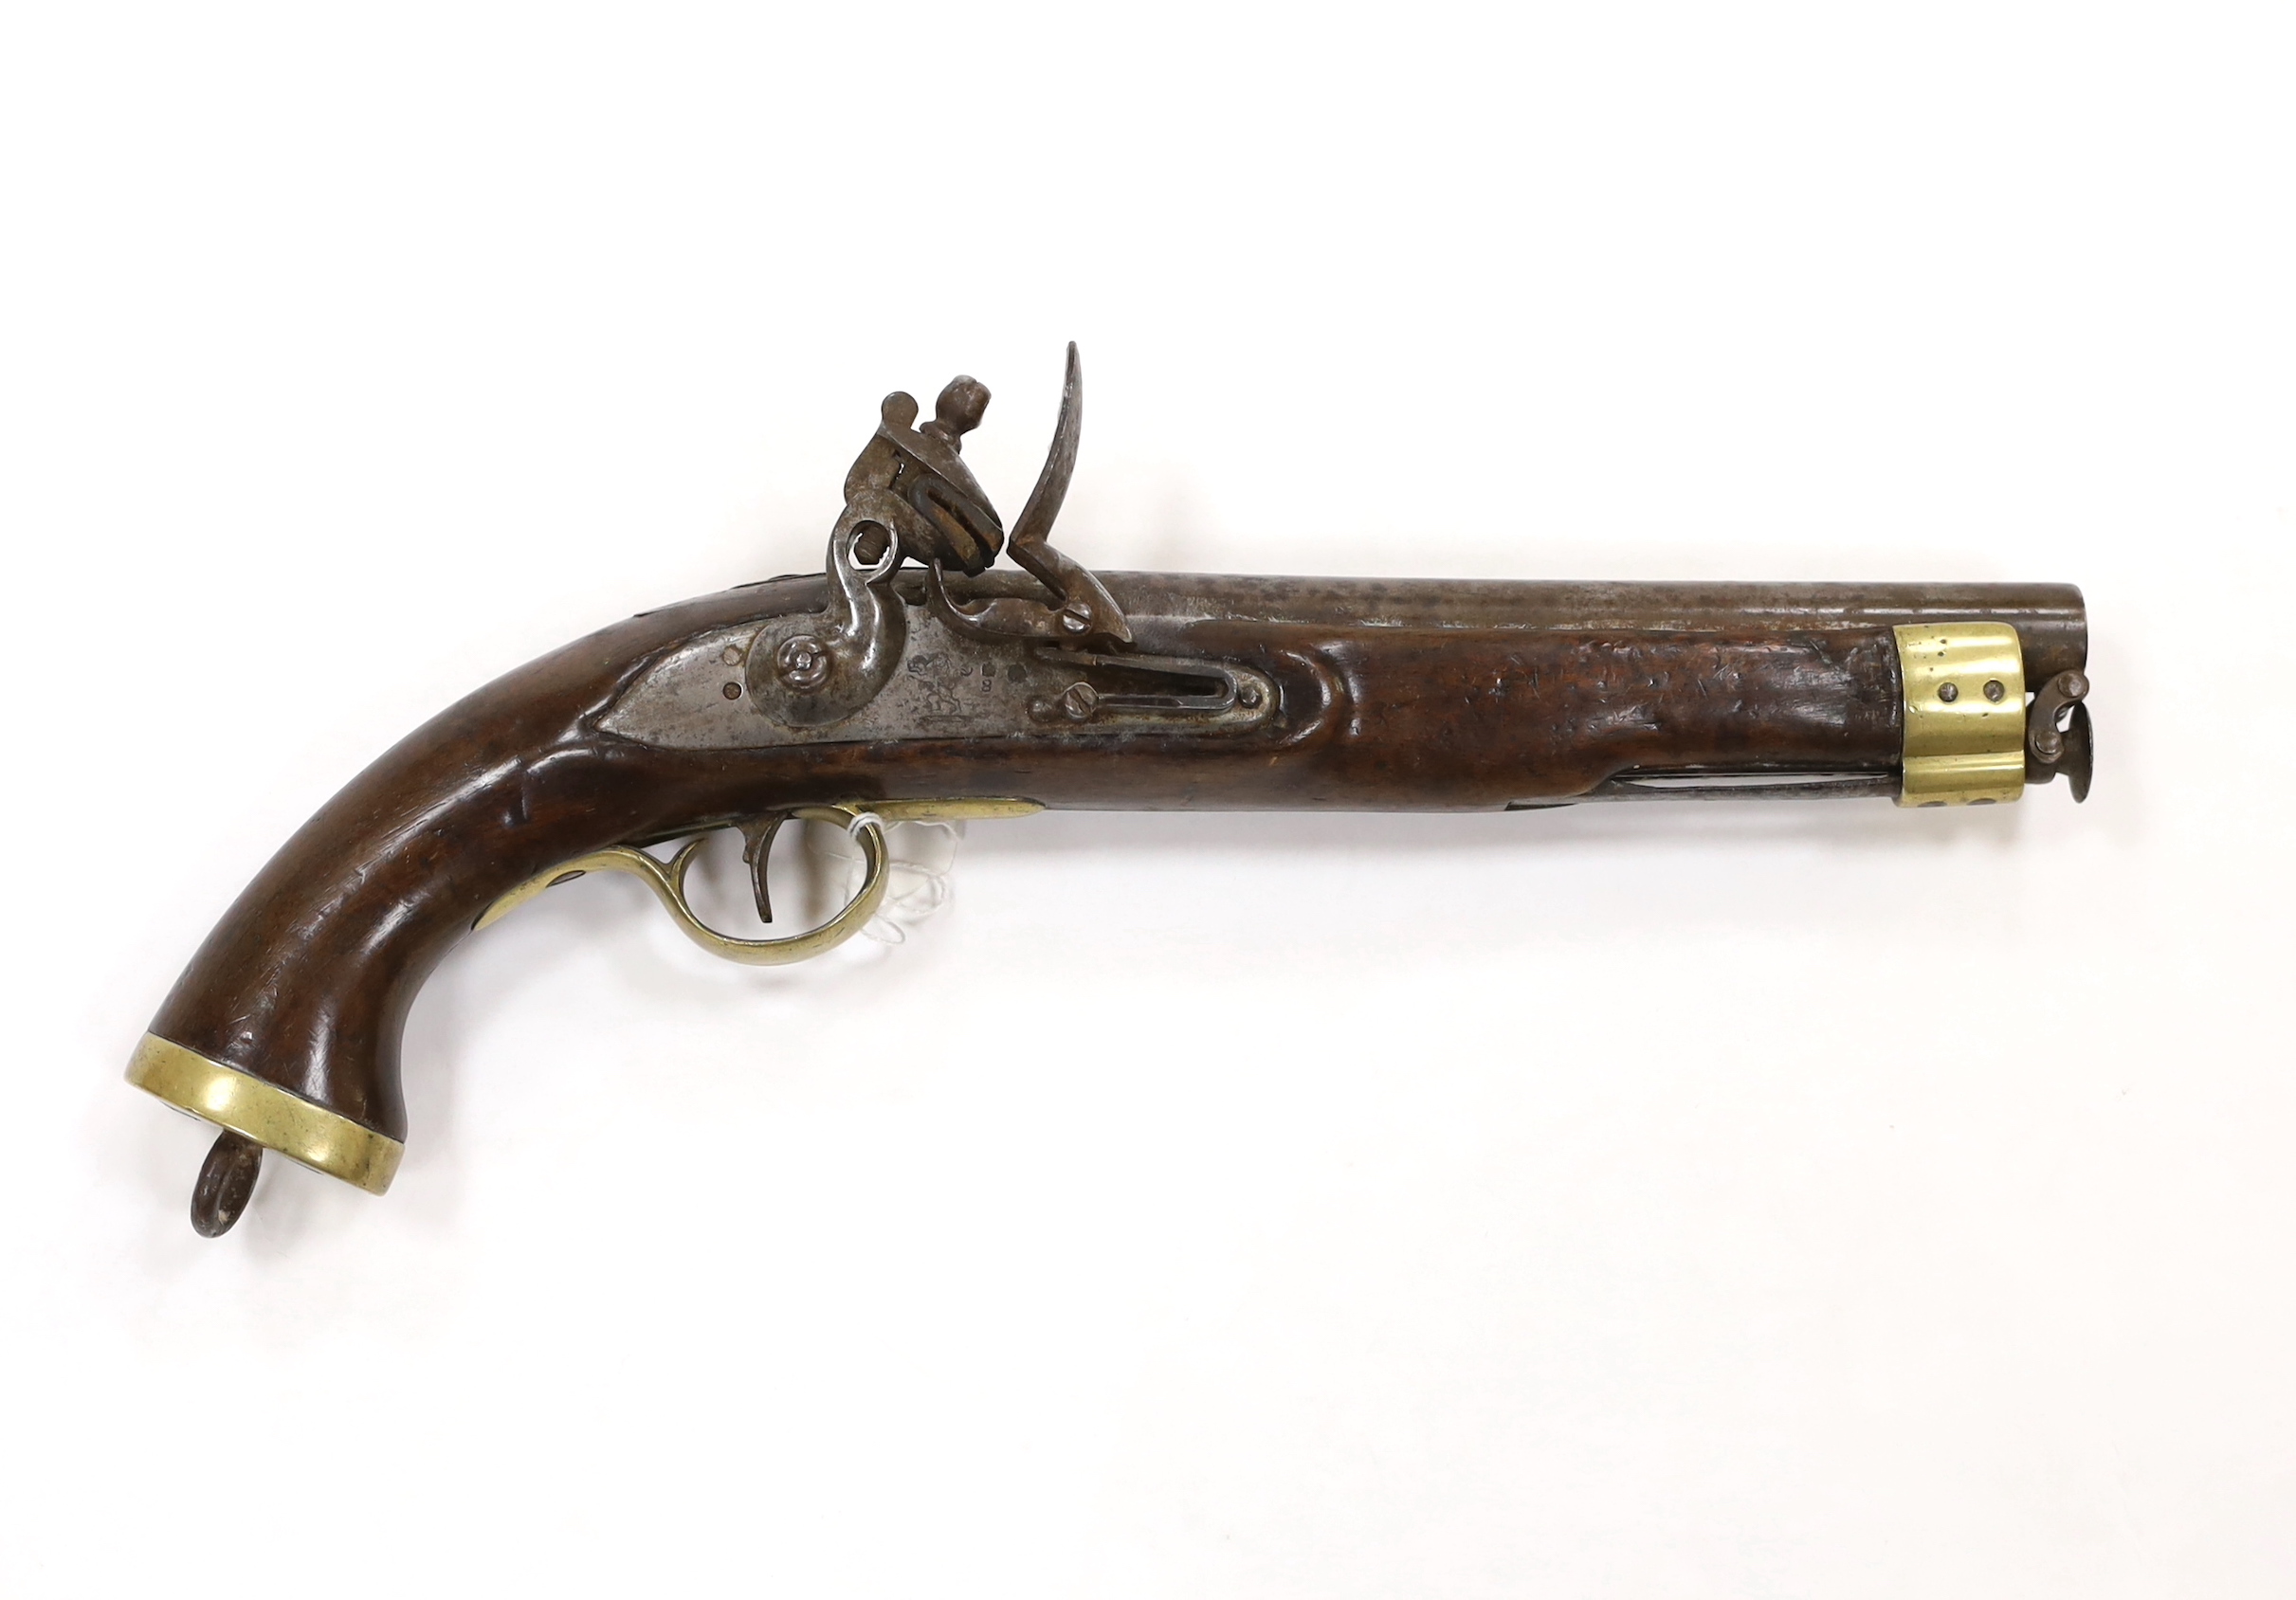 A 16 bore East India Company flintlock pistol, 9” barrel, London proof marks, regulation brass mounts and lock with EIC lion rampant, and fitted with iron lanyard with swivel ram rod